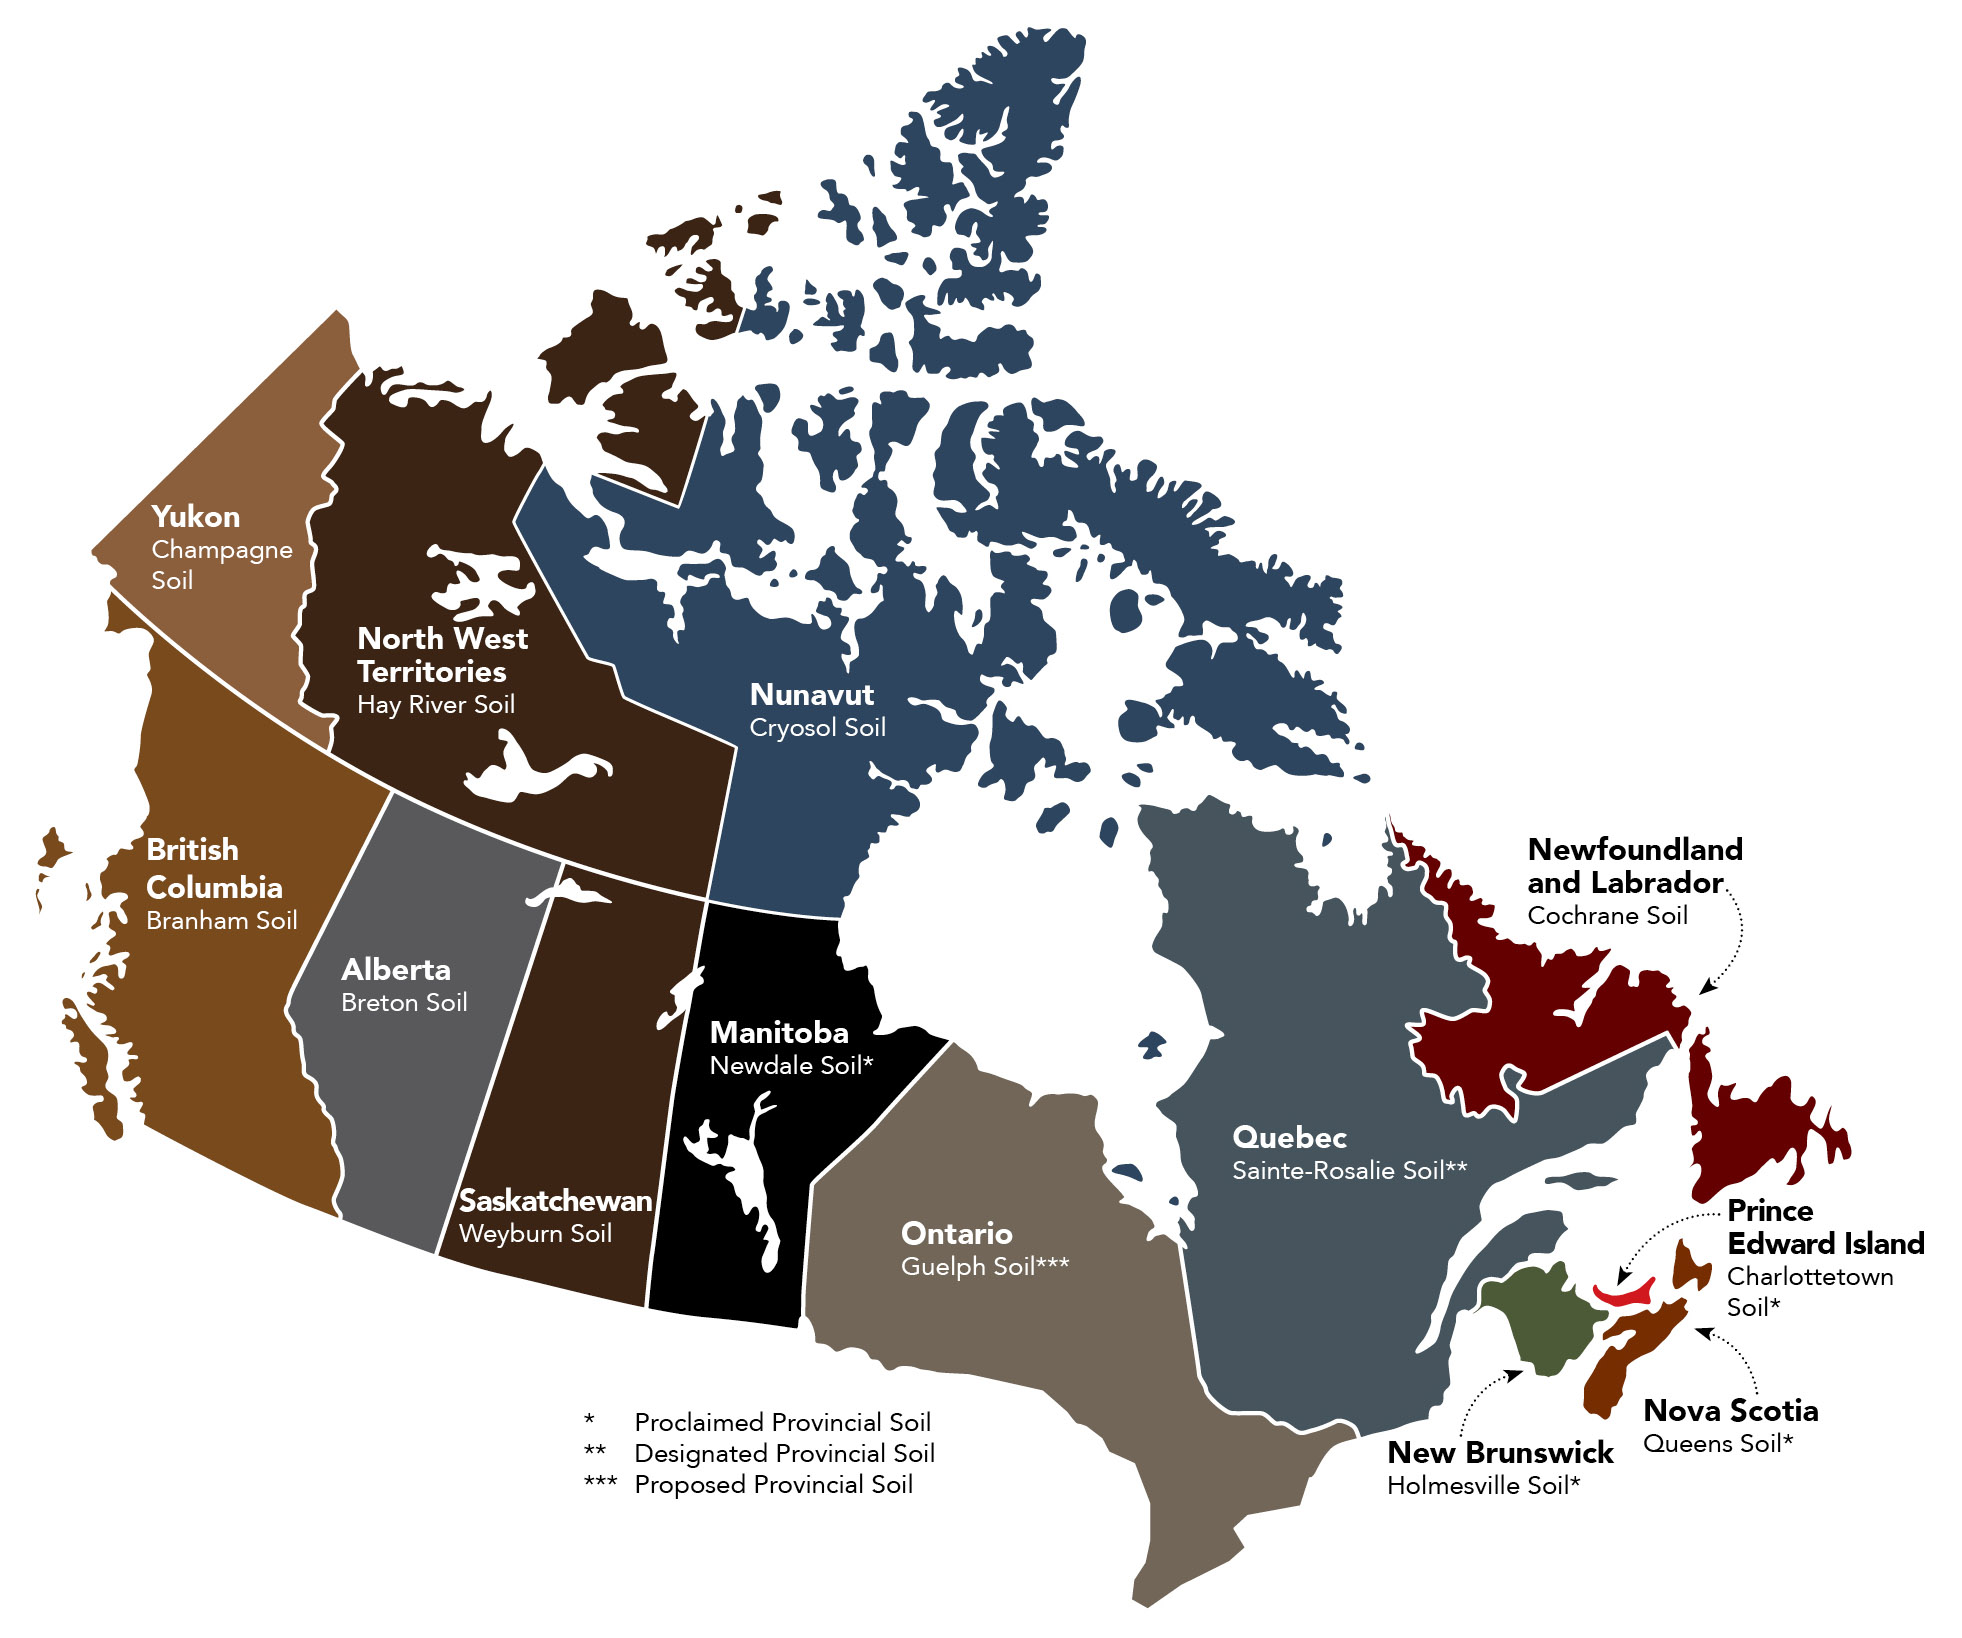 A map of Canada shows the significant agricultural soils by province/territory.